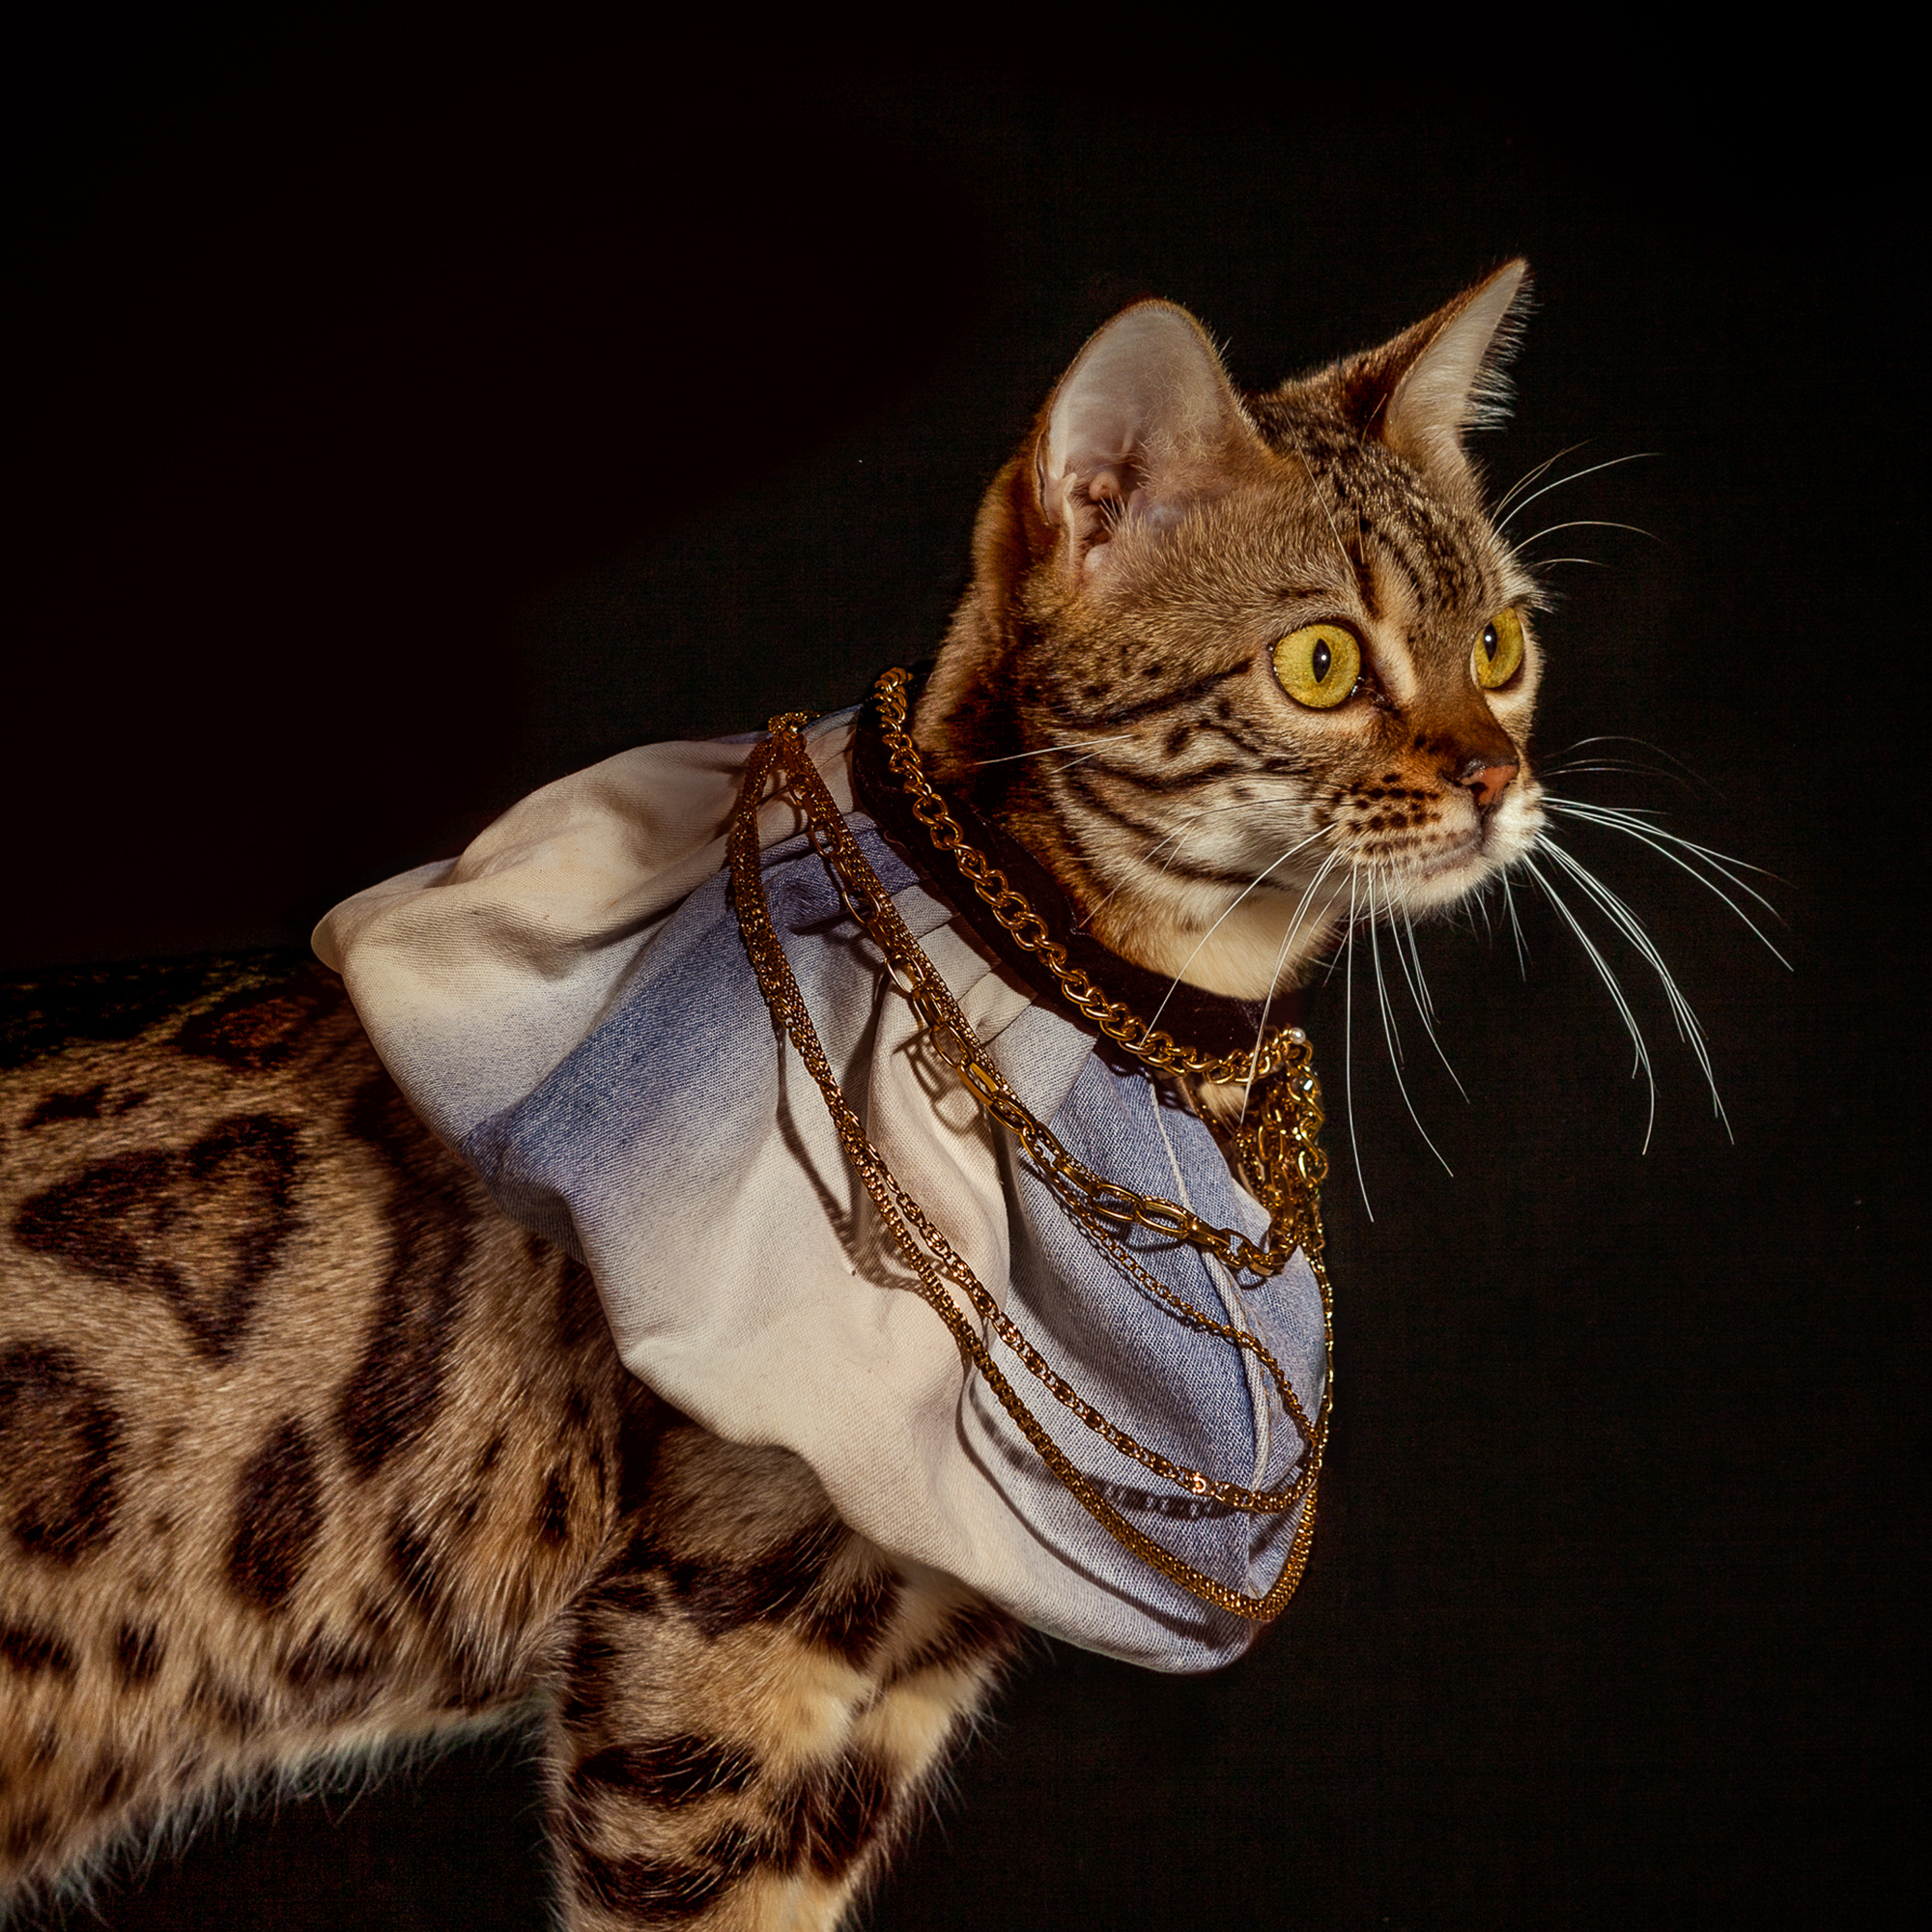  Bengal cat,  Jungletrax After Dark,  is lookin fly in her 90s denim mini skirt-inspired collar and gold Bengal bling by cool cat, Alicia Gordon.  